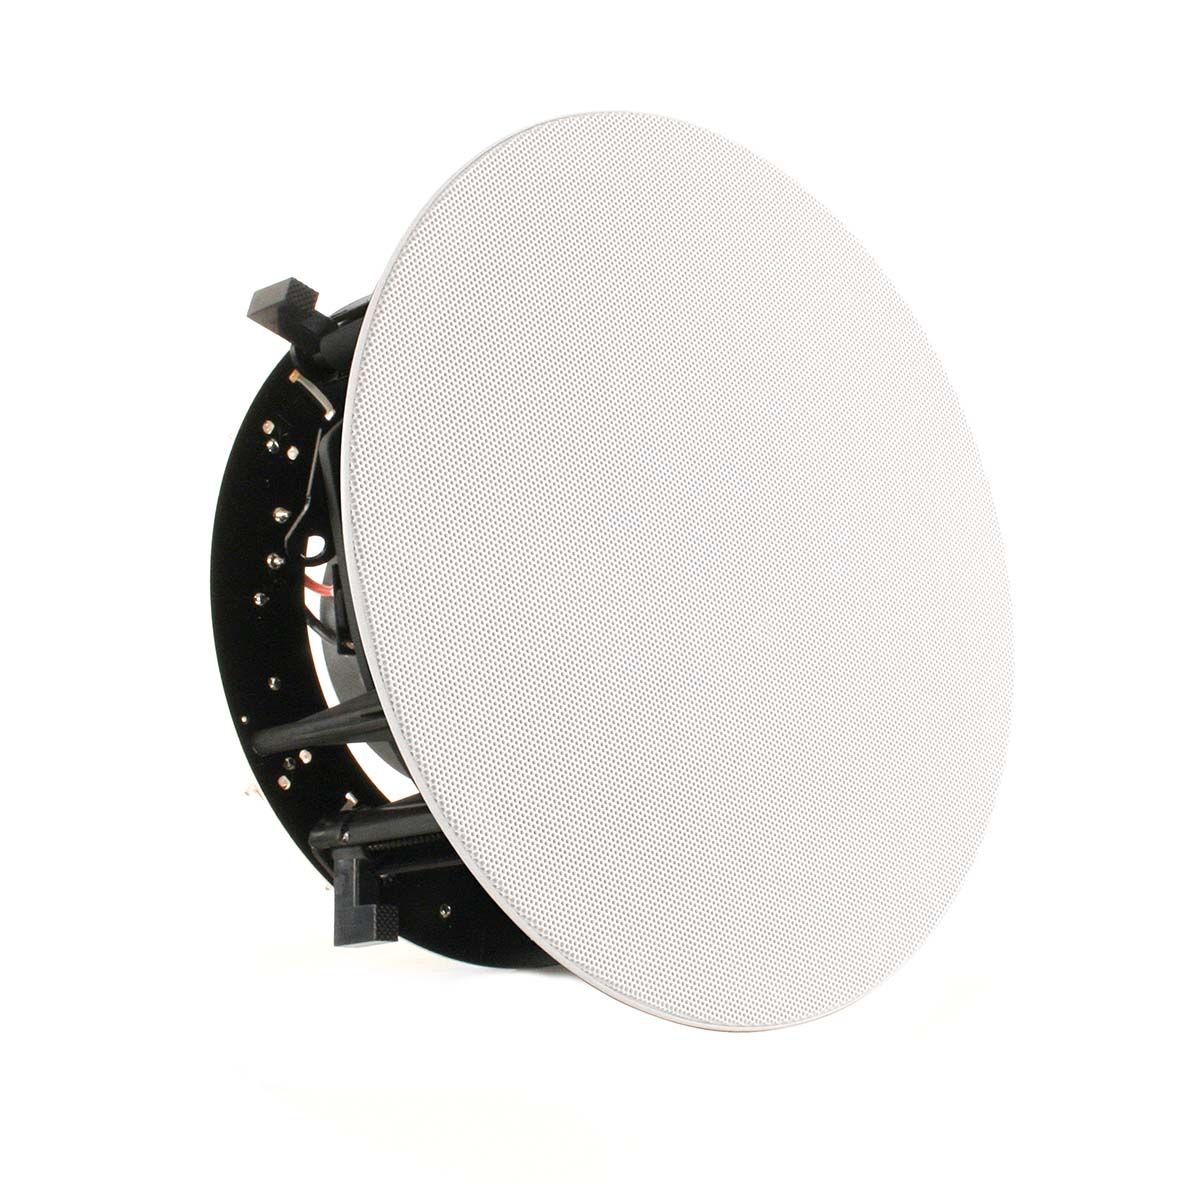 Revel C783 In-Ceiling Speaker, front angle with round grille